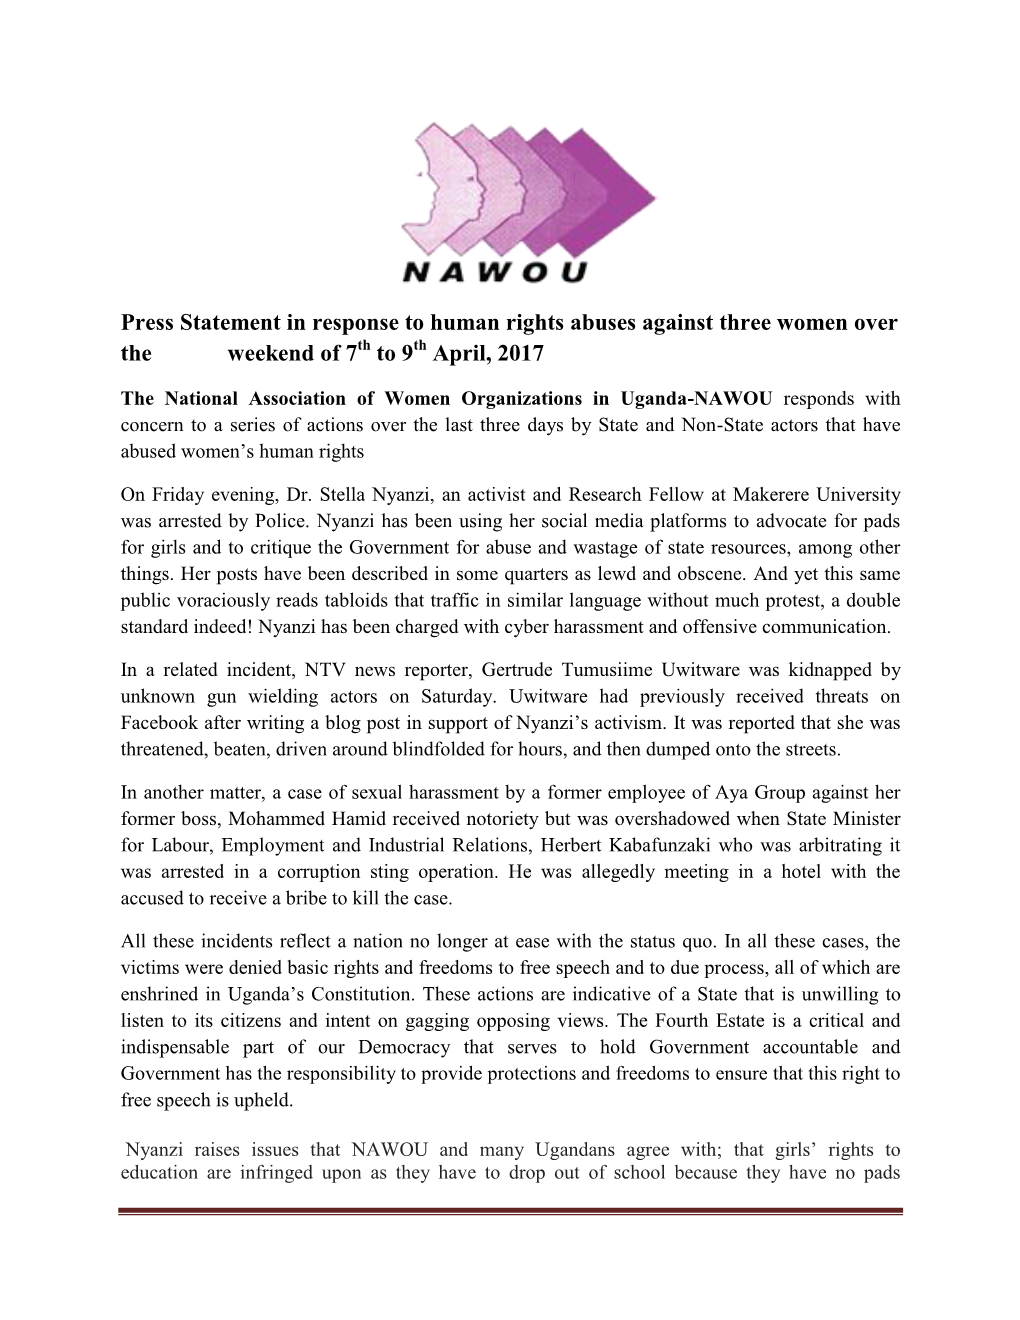 Press Statement in Response to Human Rights Abuses Against Three Women Over the Weekend of 7 to 9 April, 2017